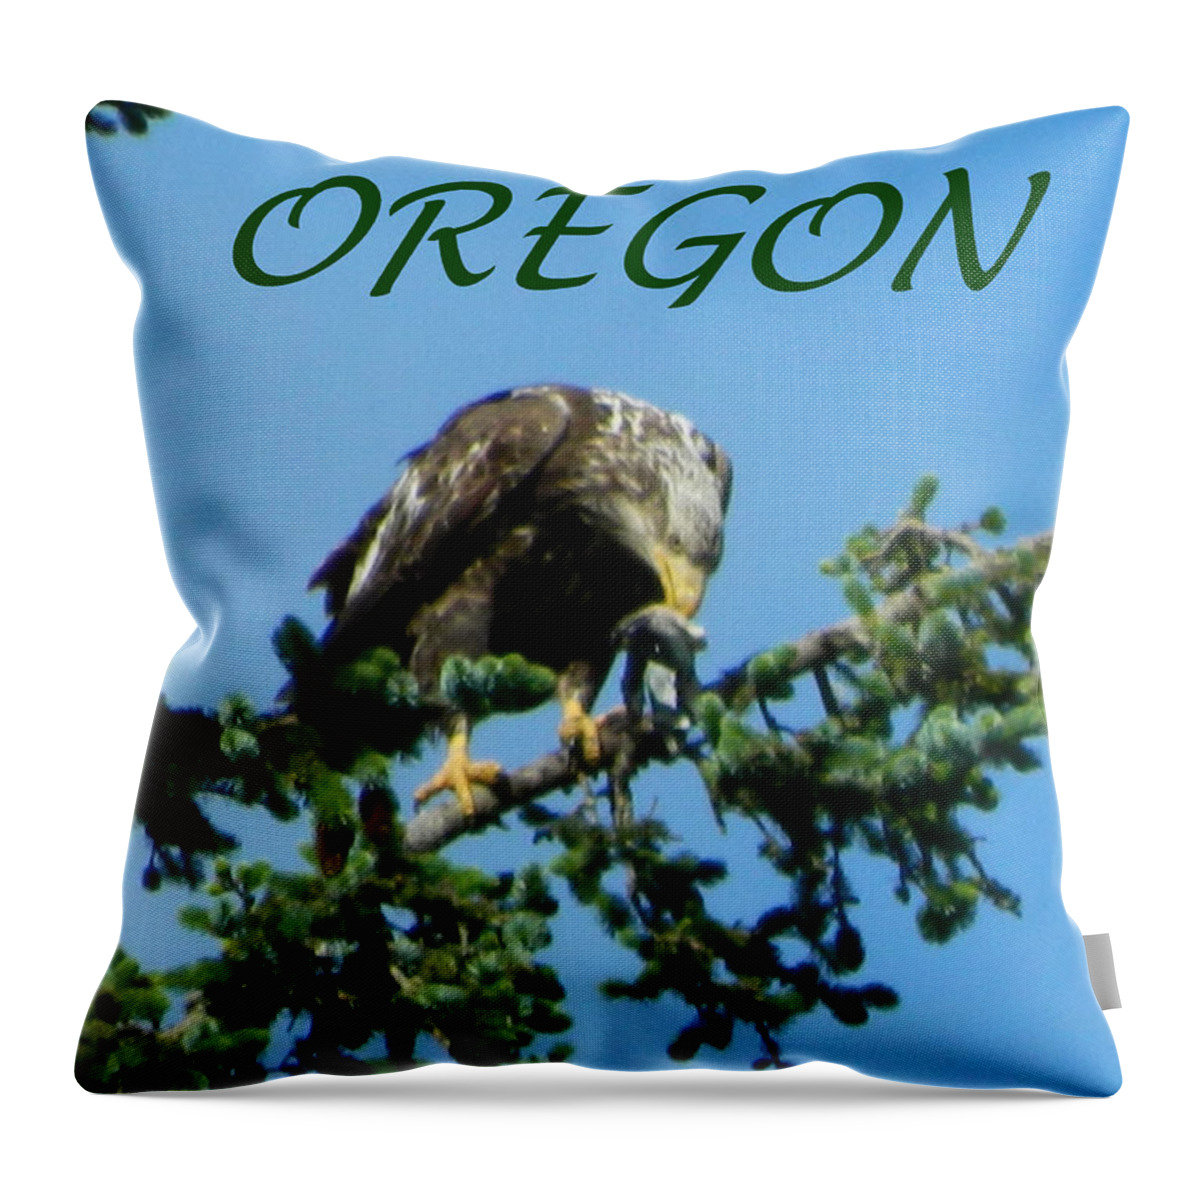 Eagles Throw Pillow featuring the photograph Oregon Eagle with Bird by Gallery Of Hope 